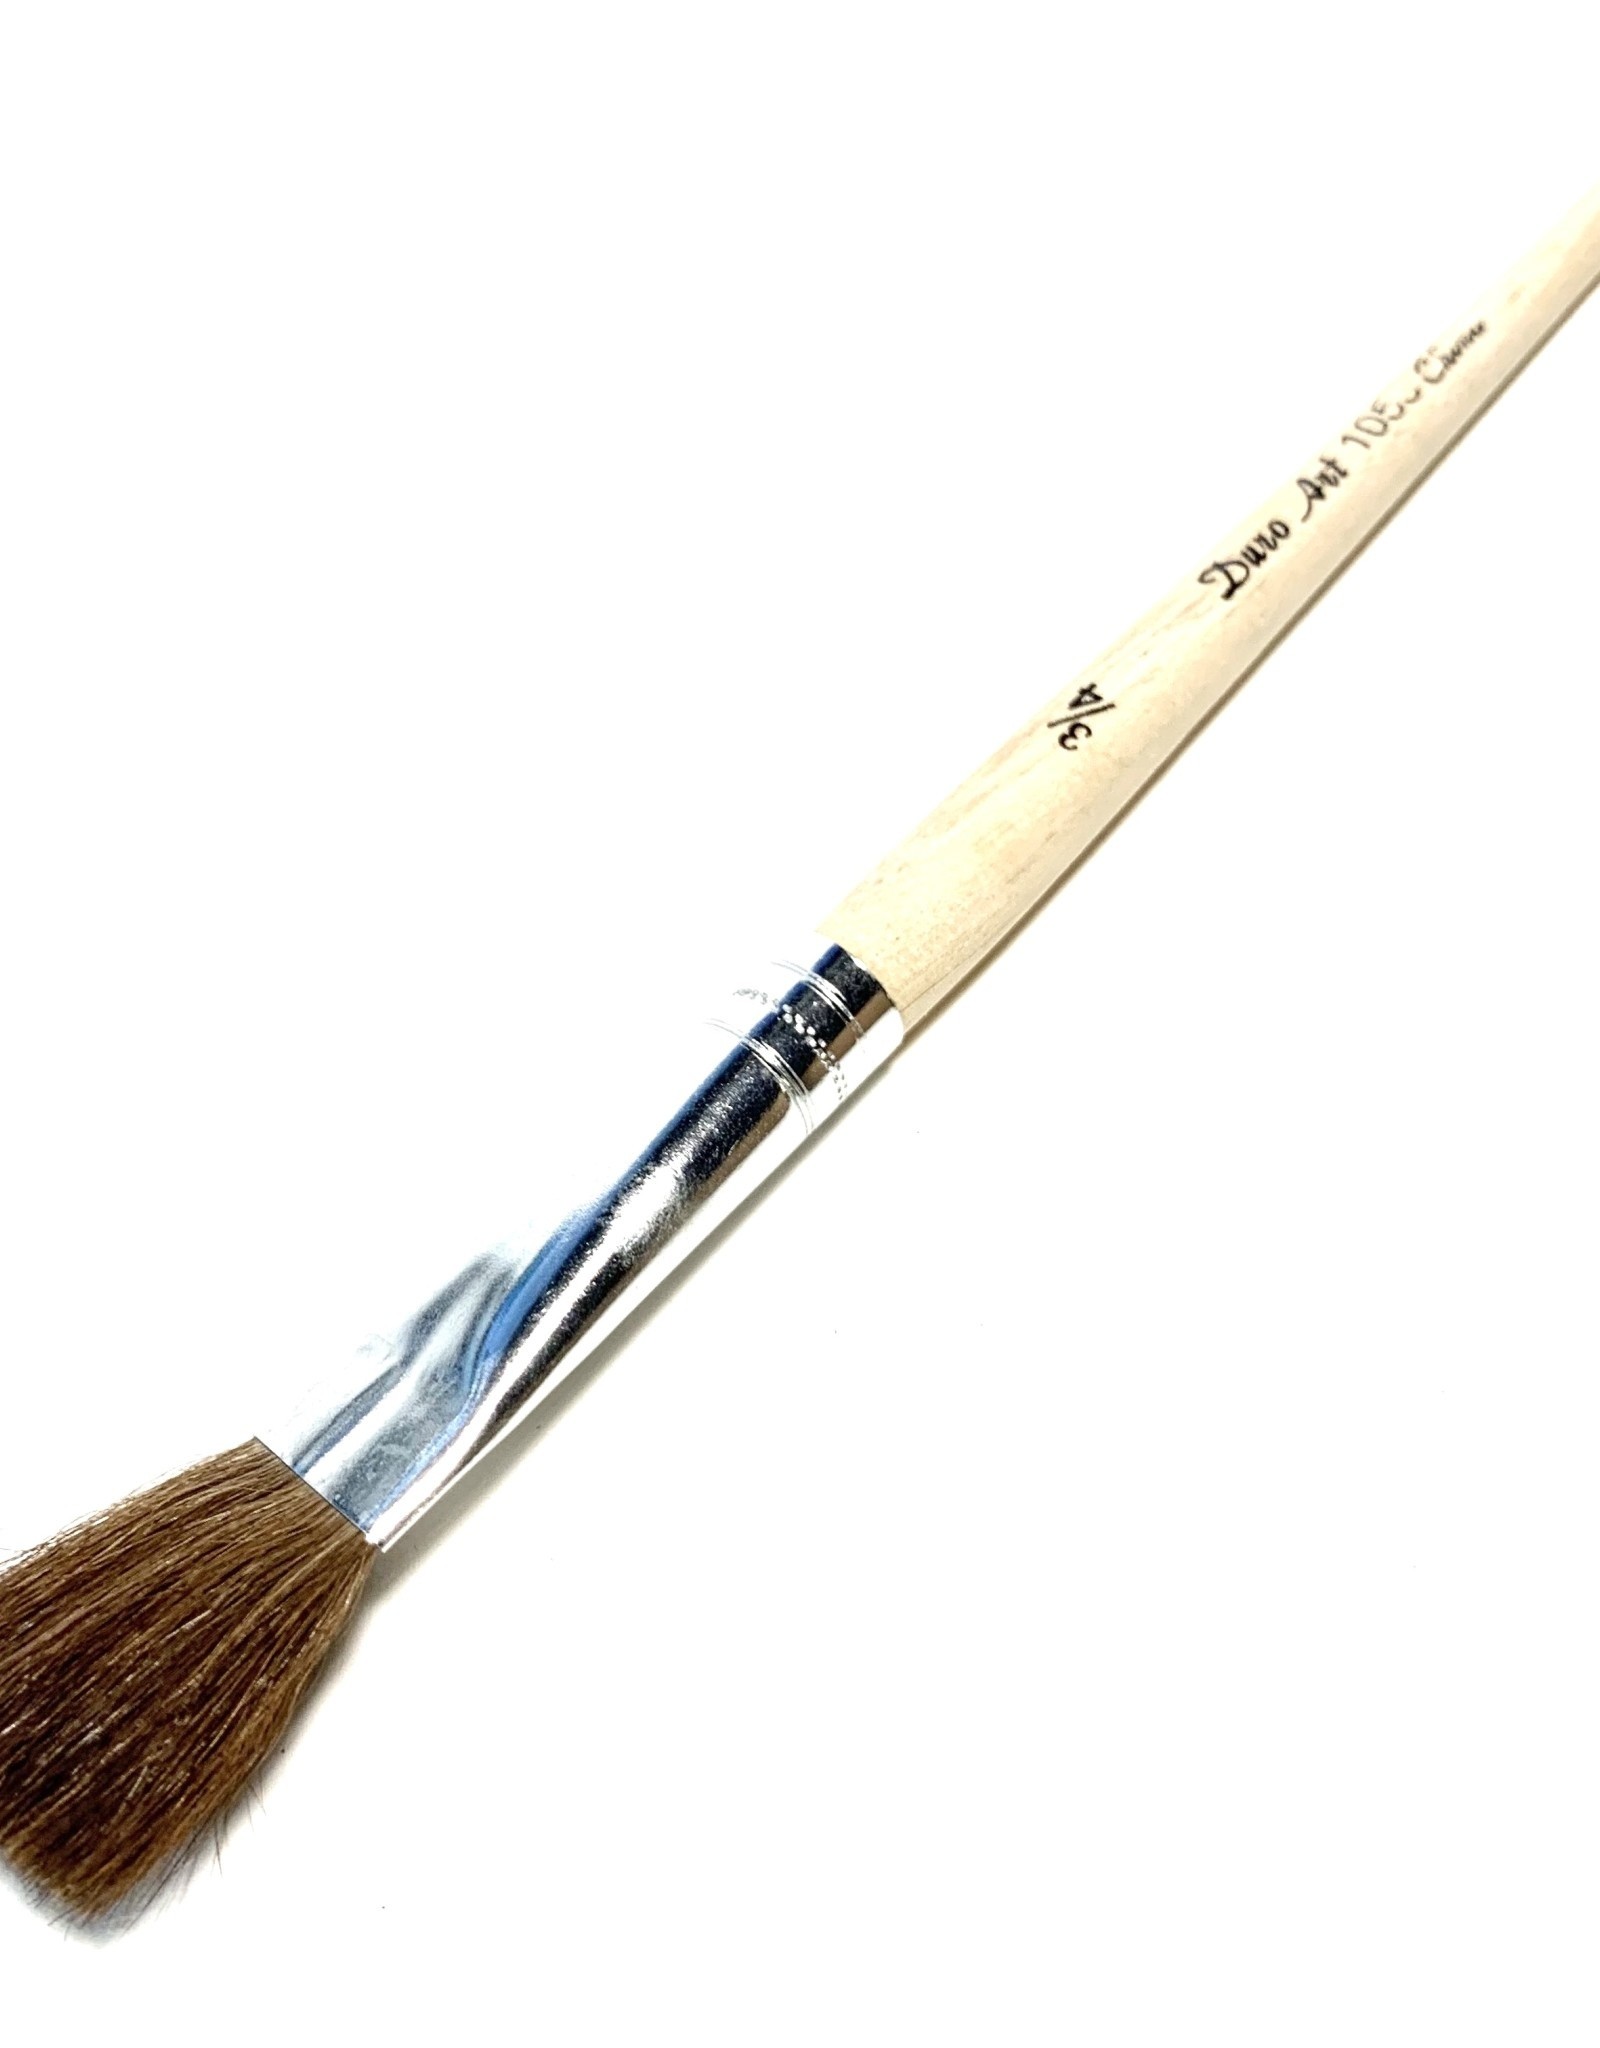 Duro Art, Camel Hair Lacquering Flat, 1053, 3/4”